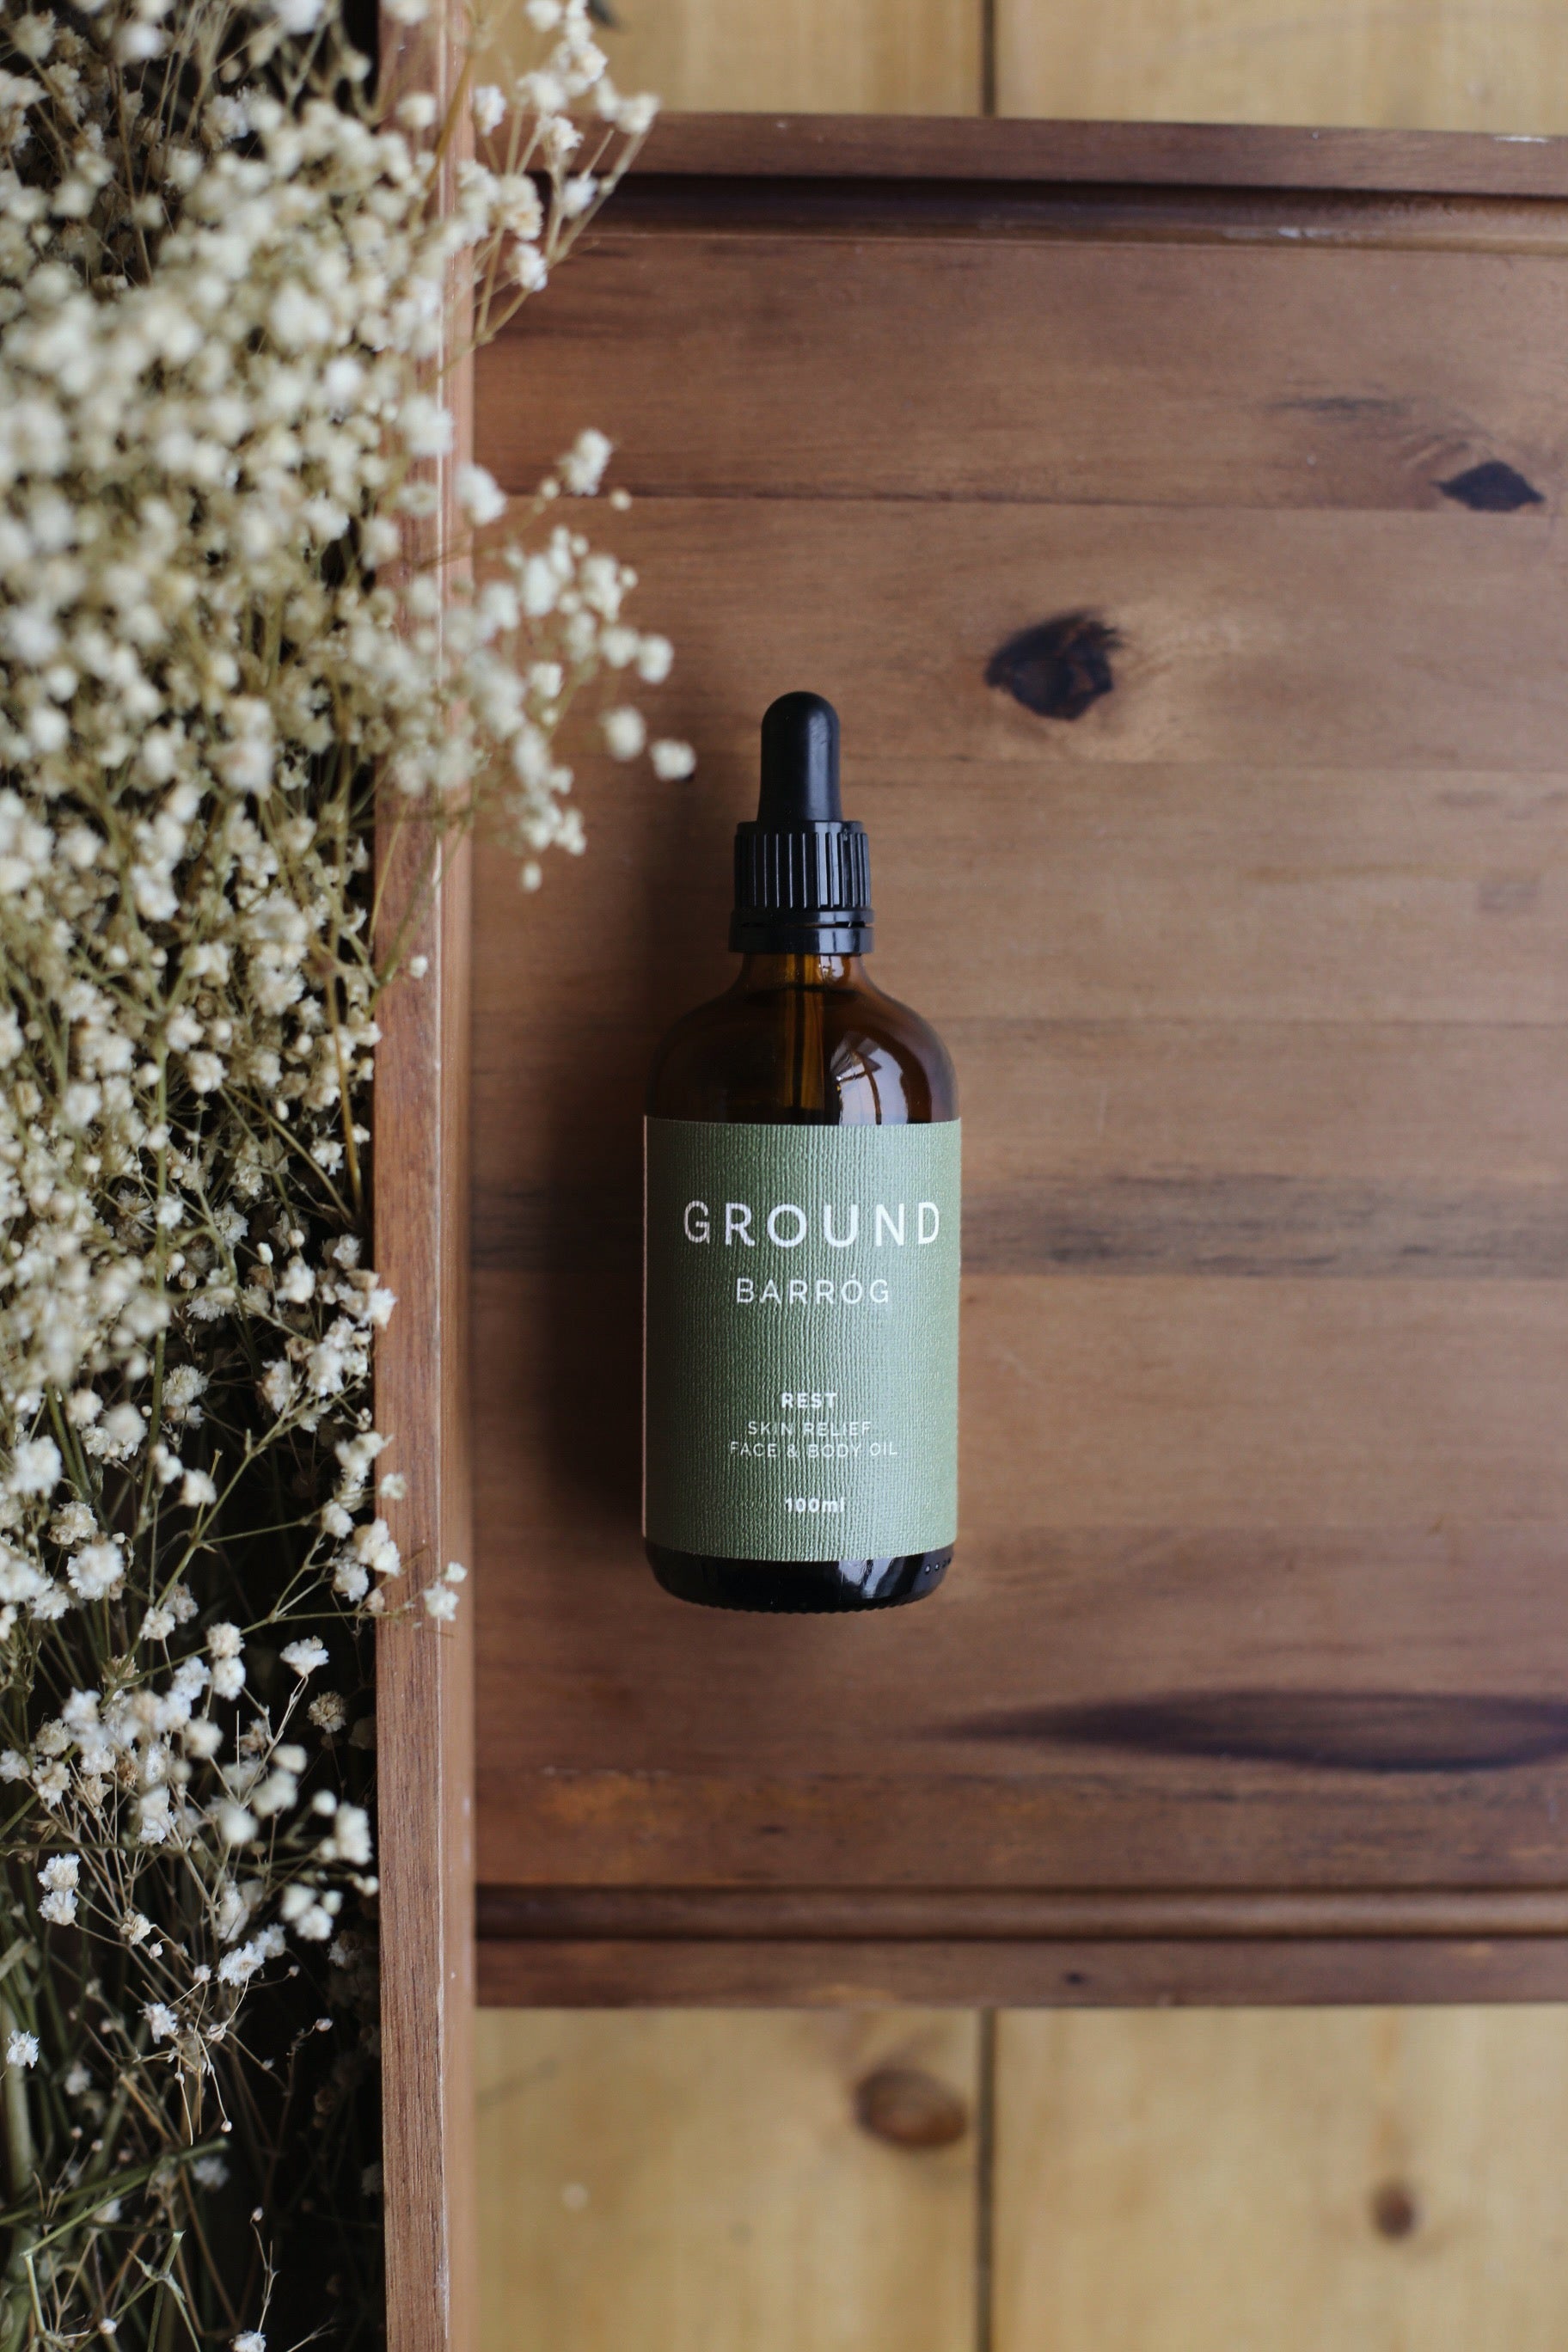 Ground Wellbeing - Rest Face & Body Oil